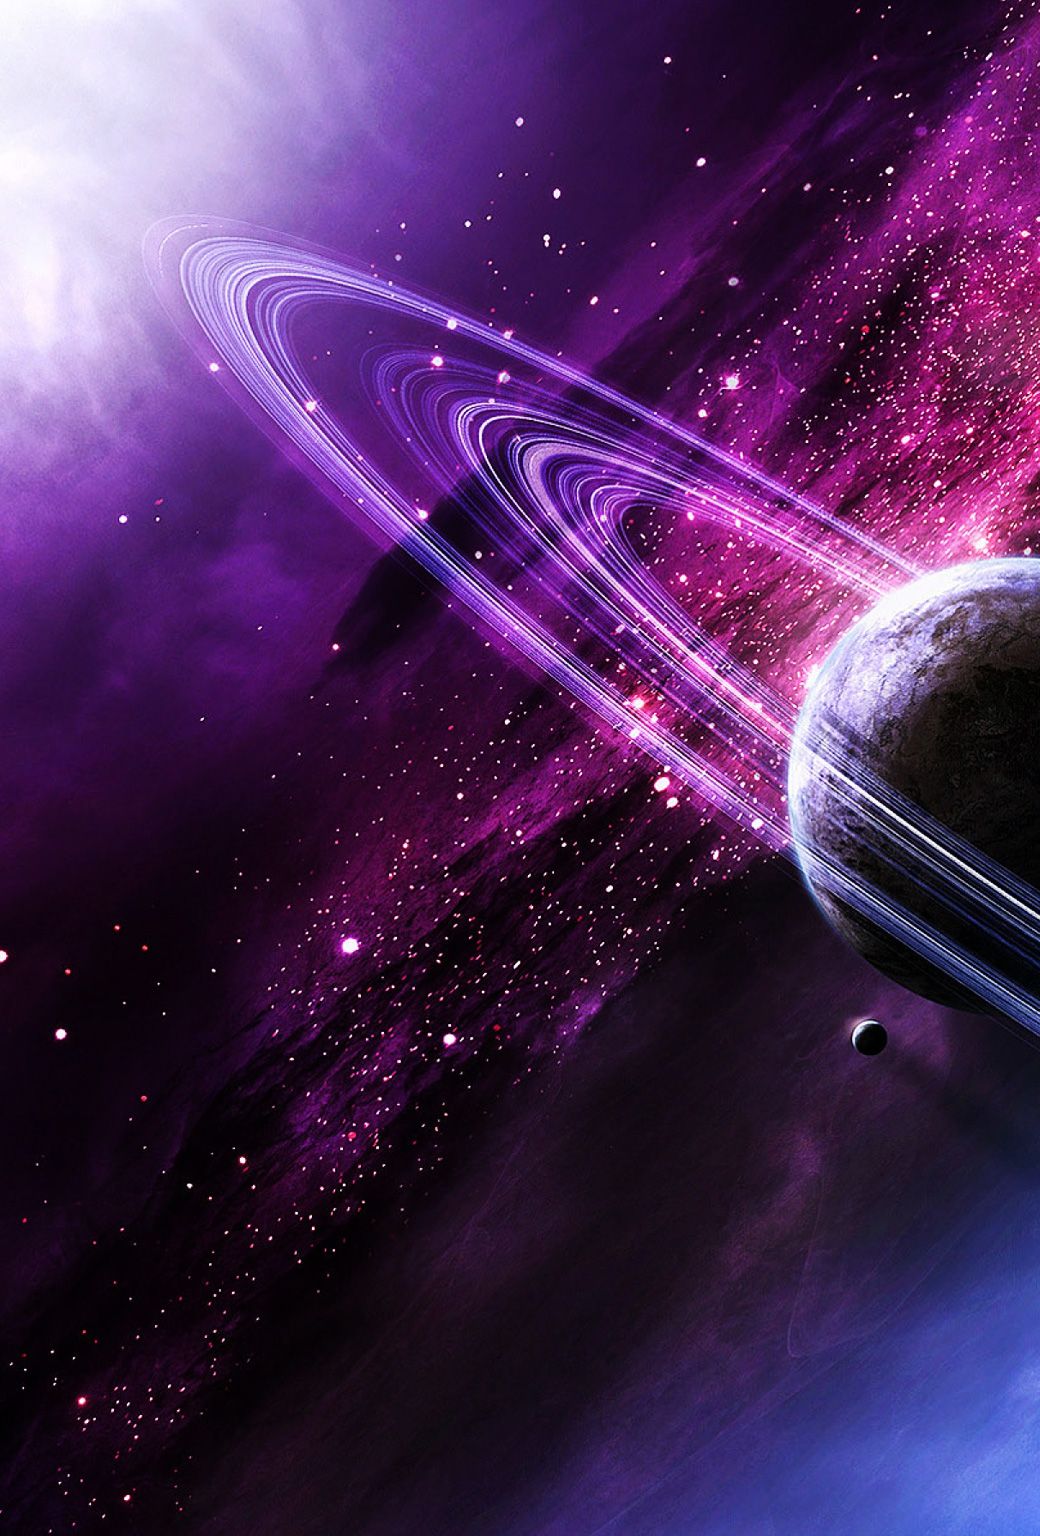 cool laptop wallpapers planets galaxy